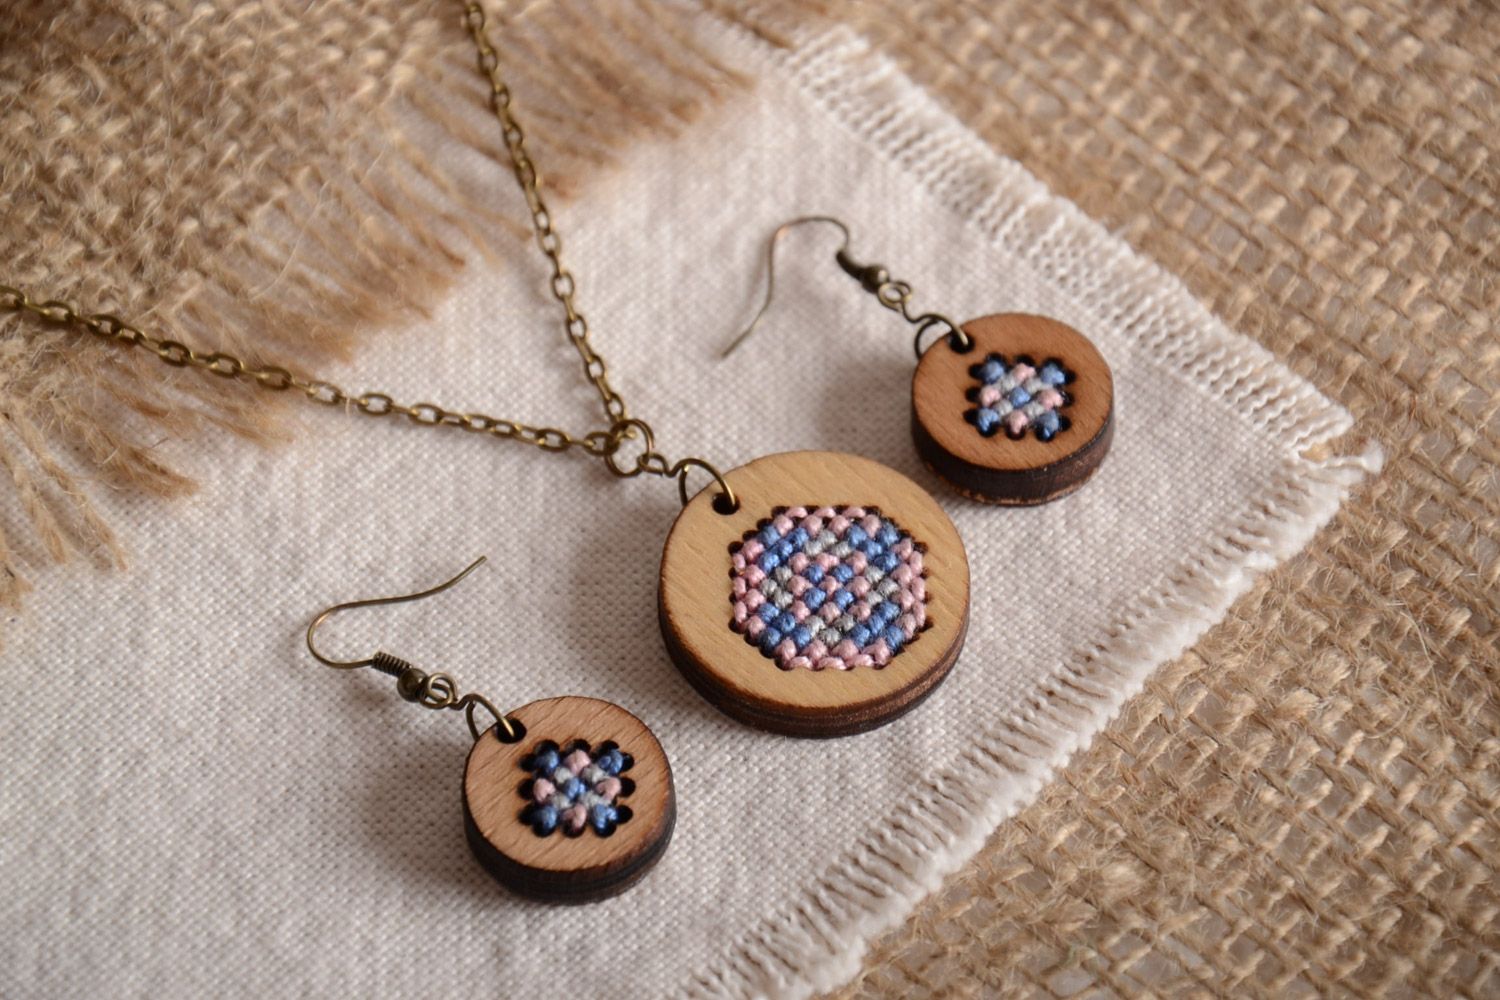 Handmade wooden jewelry set 2 pcs earrings and pendant with embroidery photo 1